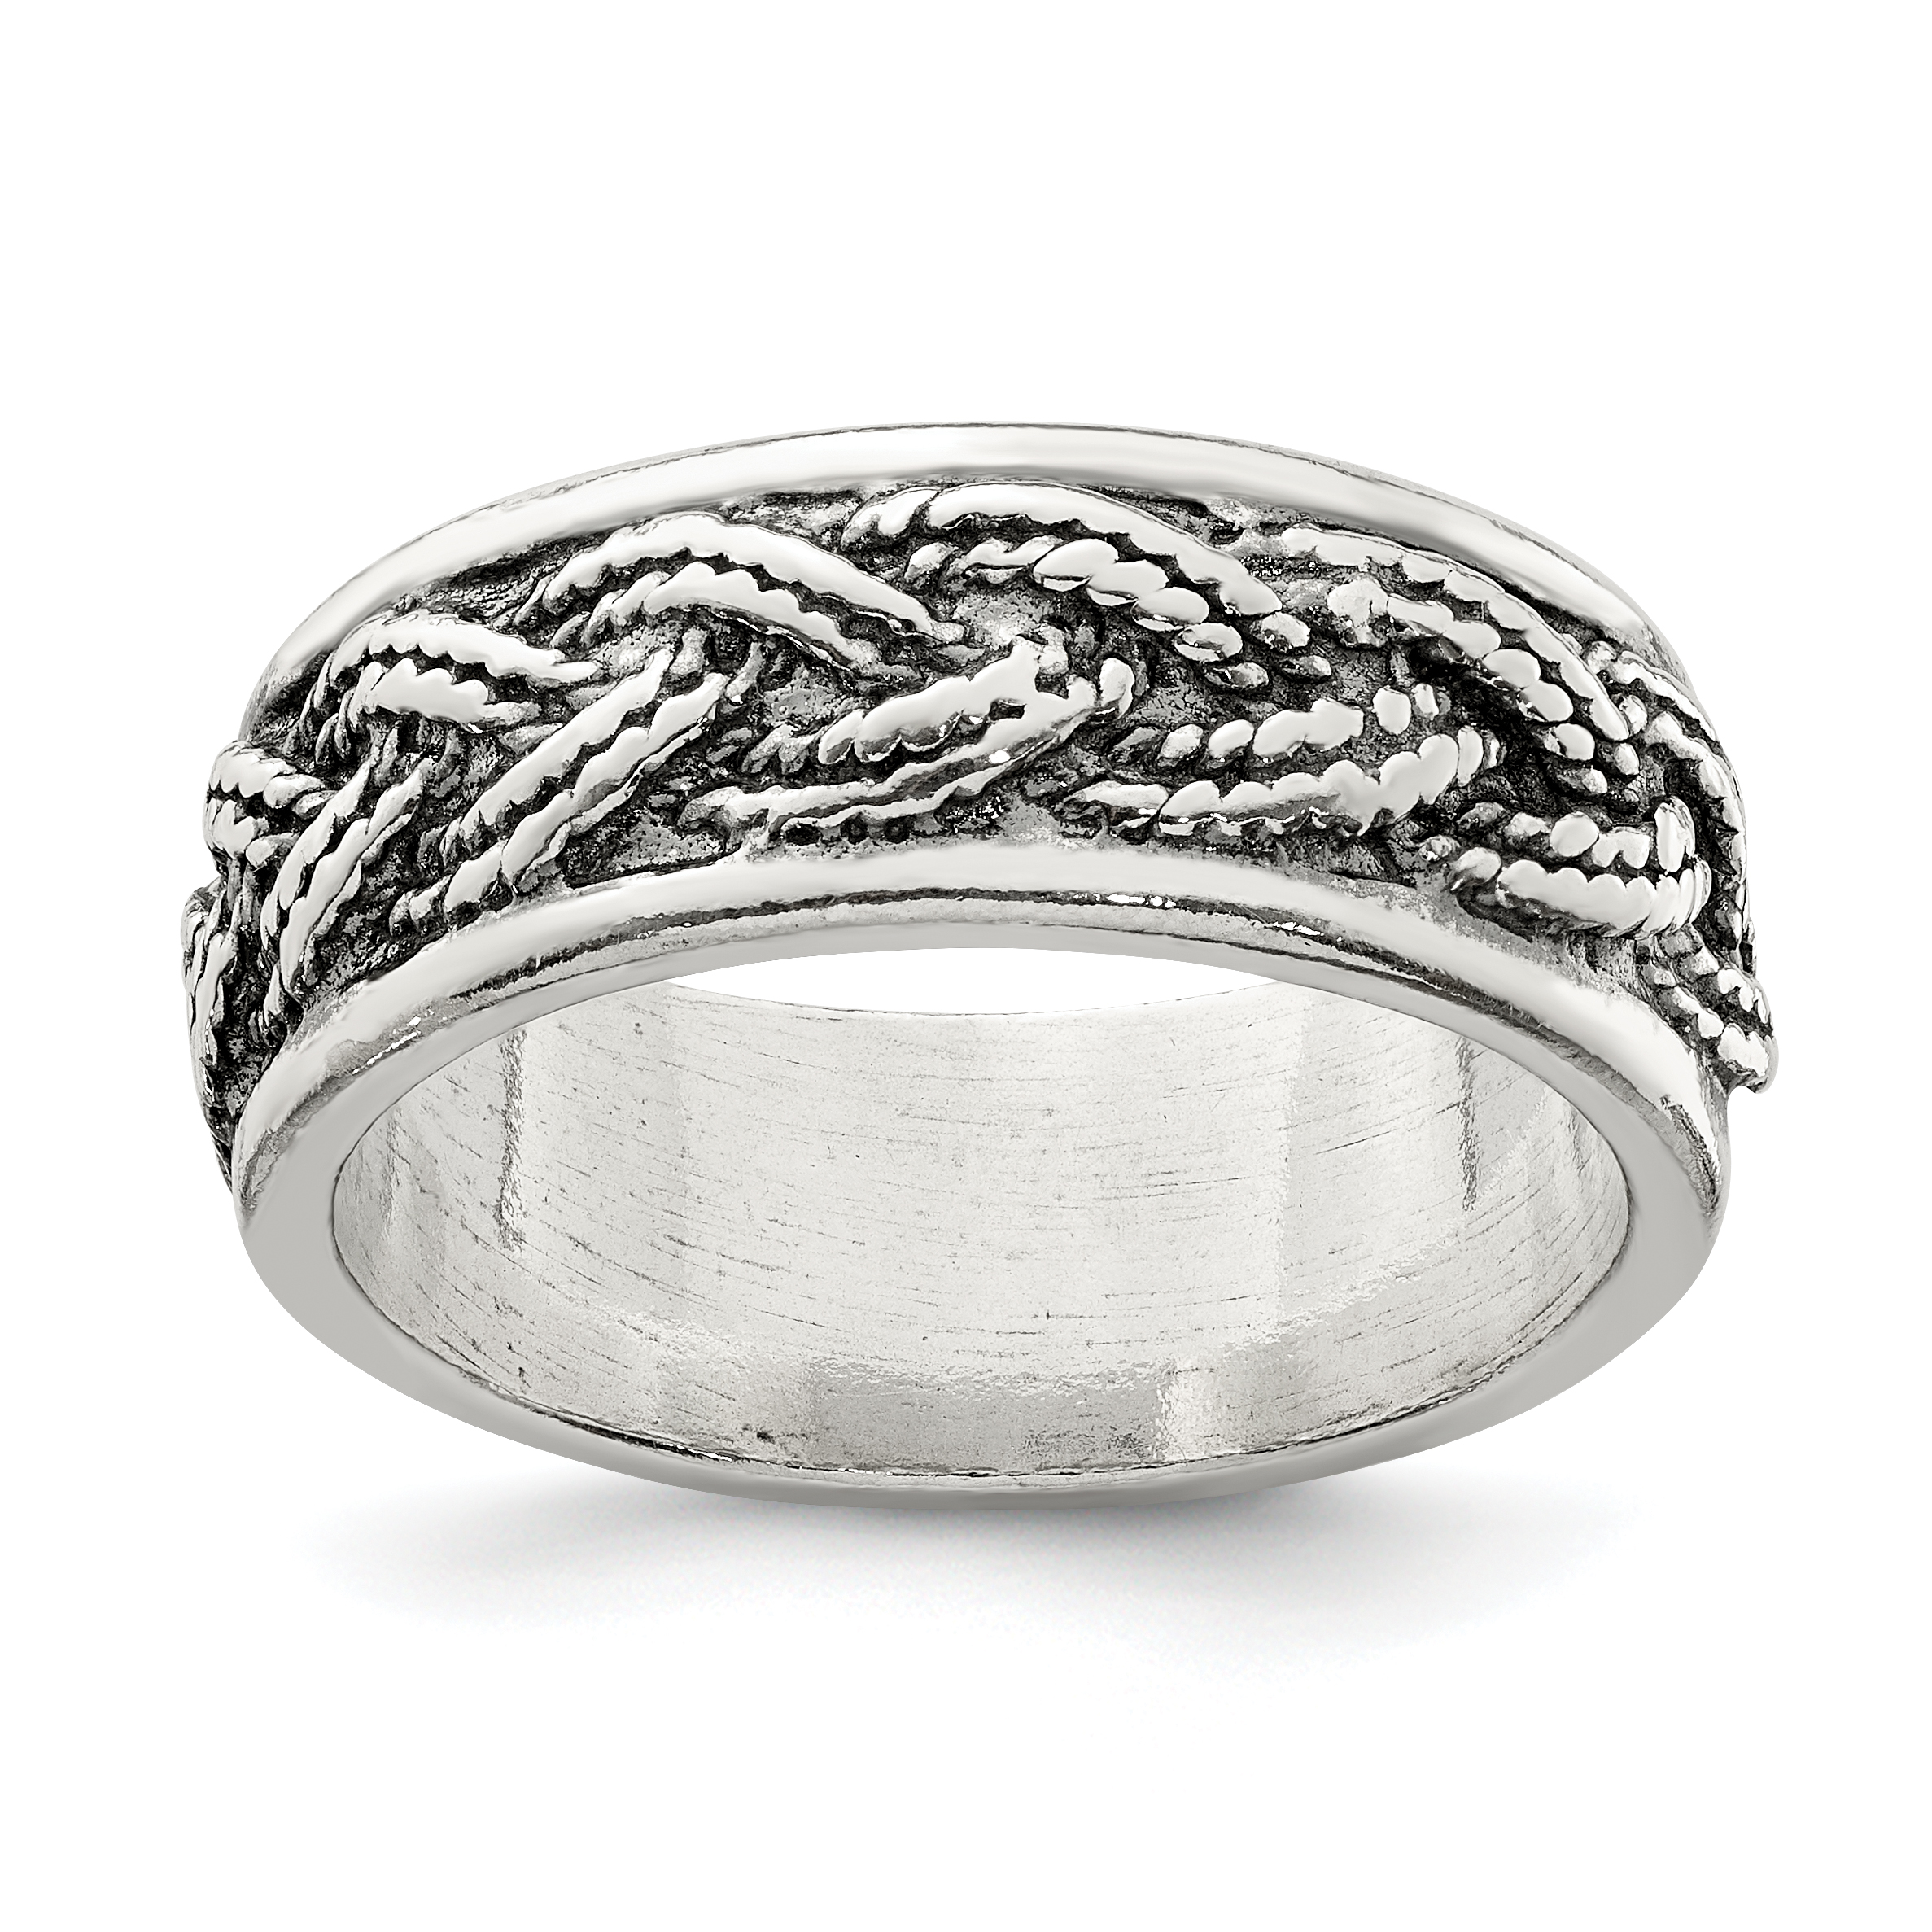 Core Silver Sterling Silver Rope Weave Design Ring